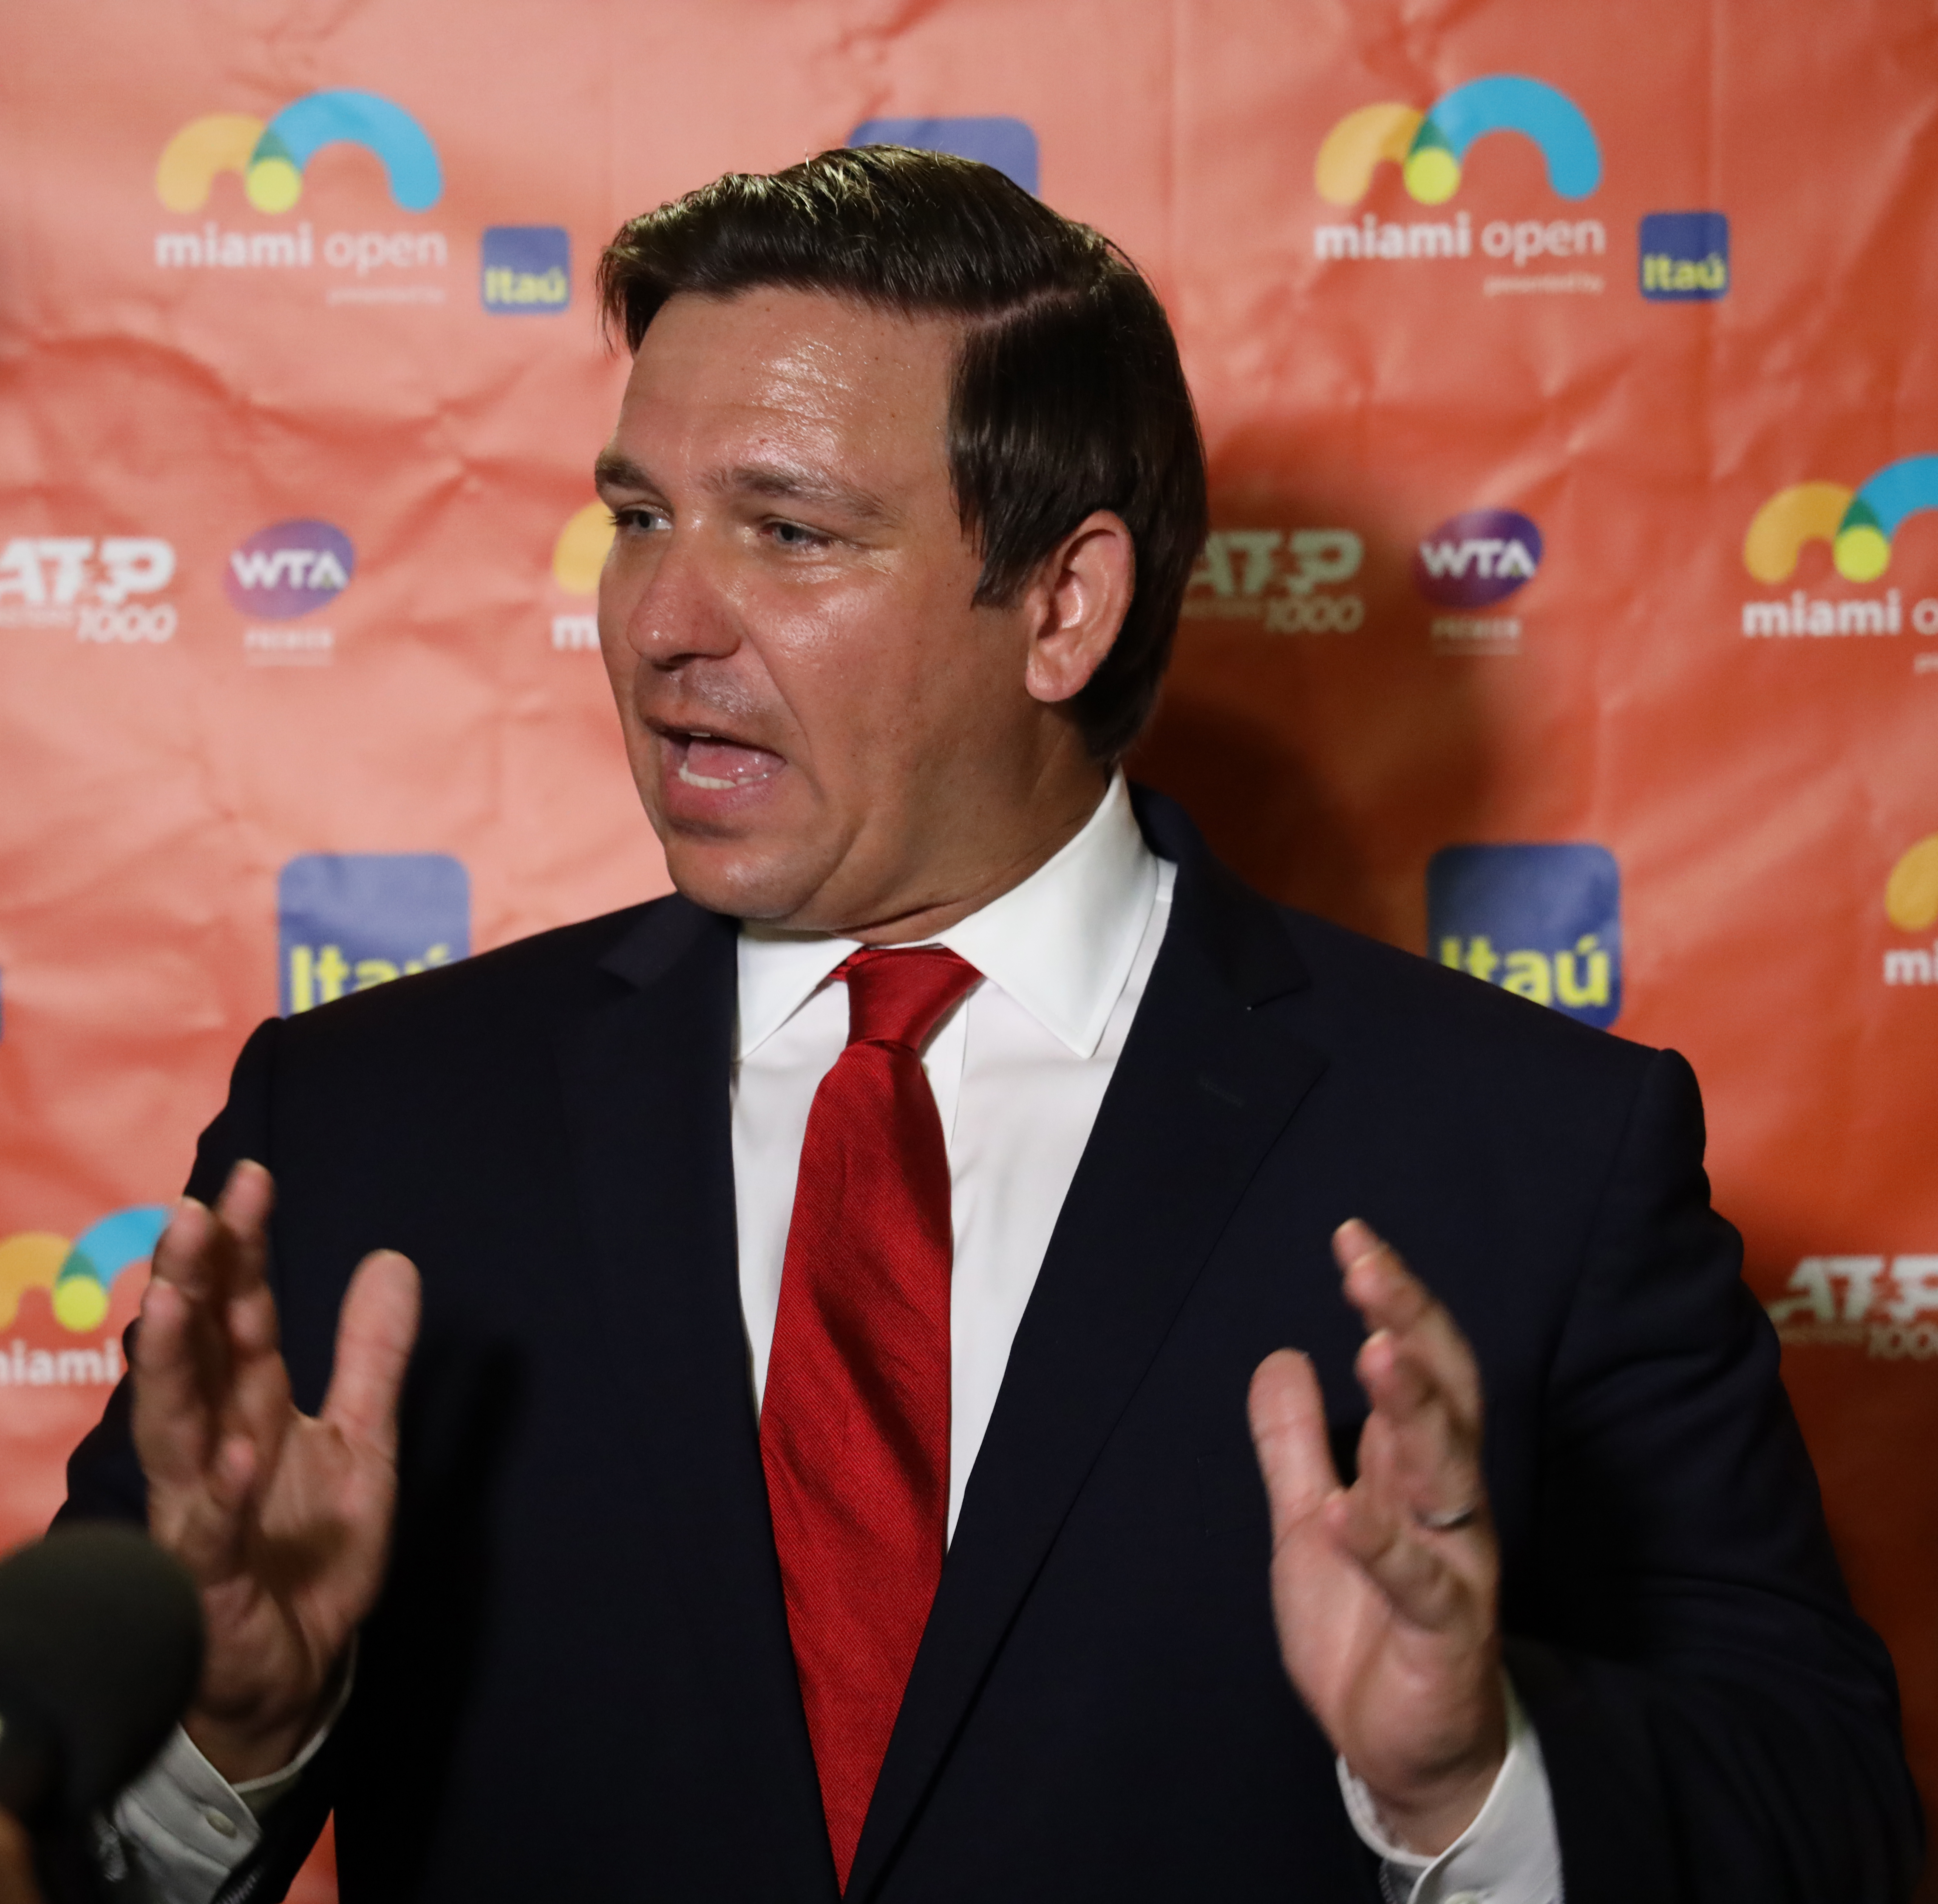 Disney Feud With DeSantis Continues: Florida Entertainment Giant Sues Governor and Board